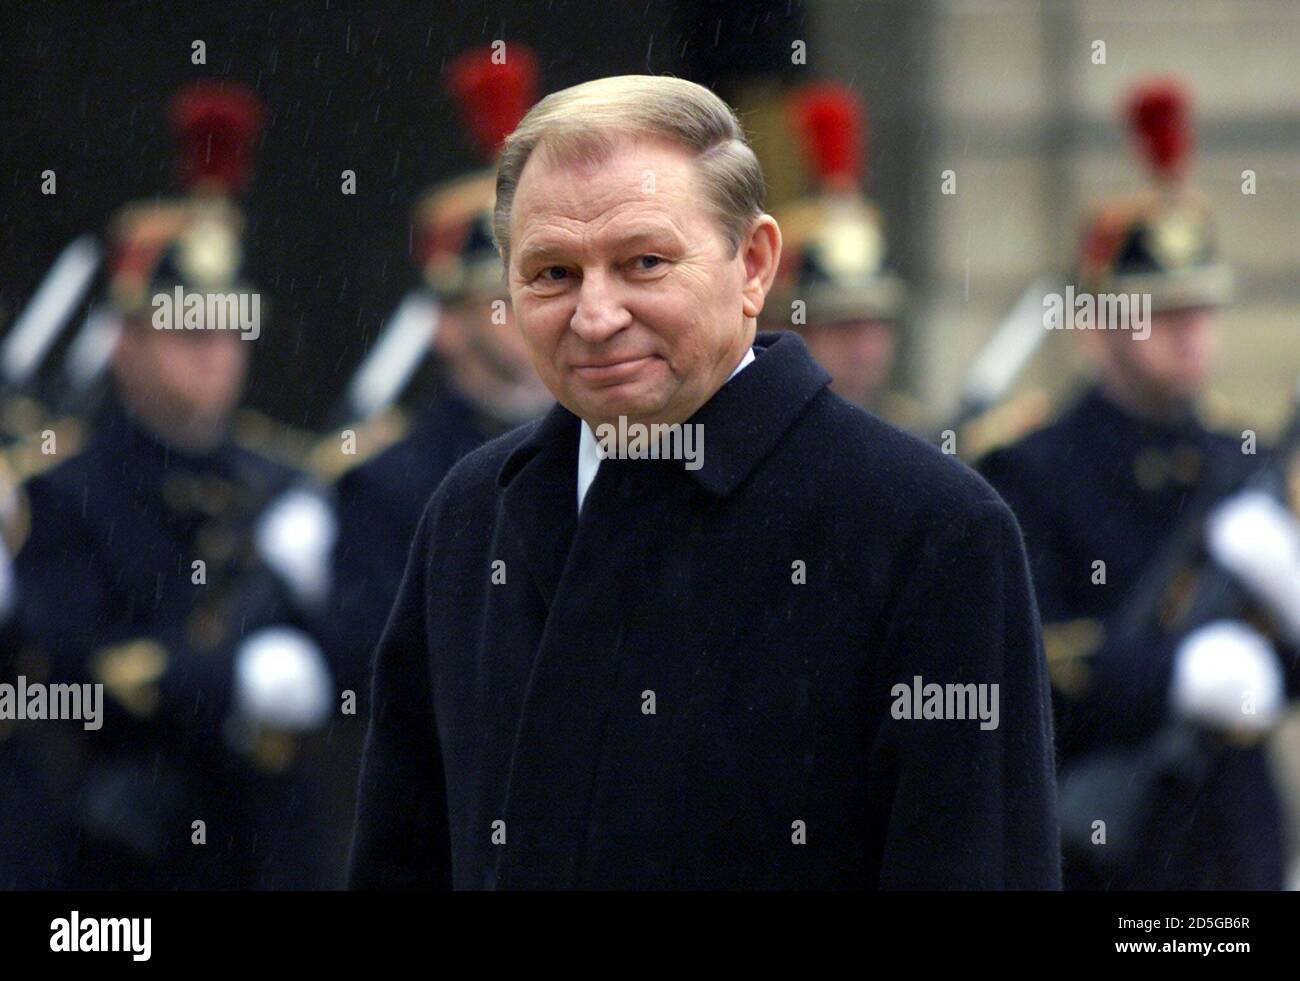 Russian President Boris Yeltsin arrives at an Amman royal palace to attend  the burial of Jordan's King Hussein February 8. World leaders are attending  the funeral for King Hussein, who died of